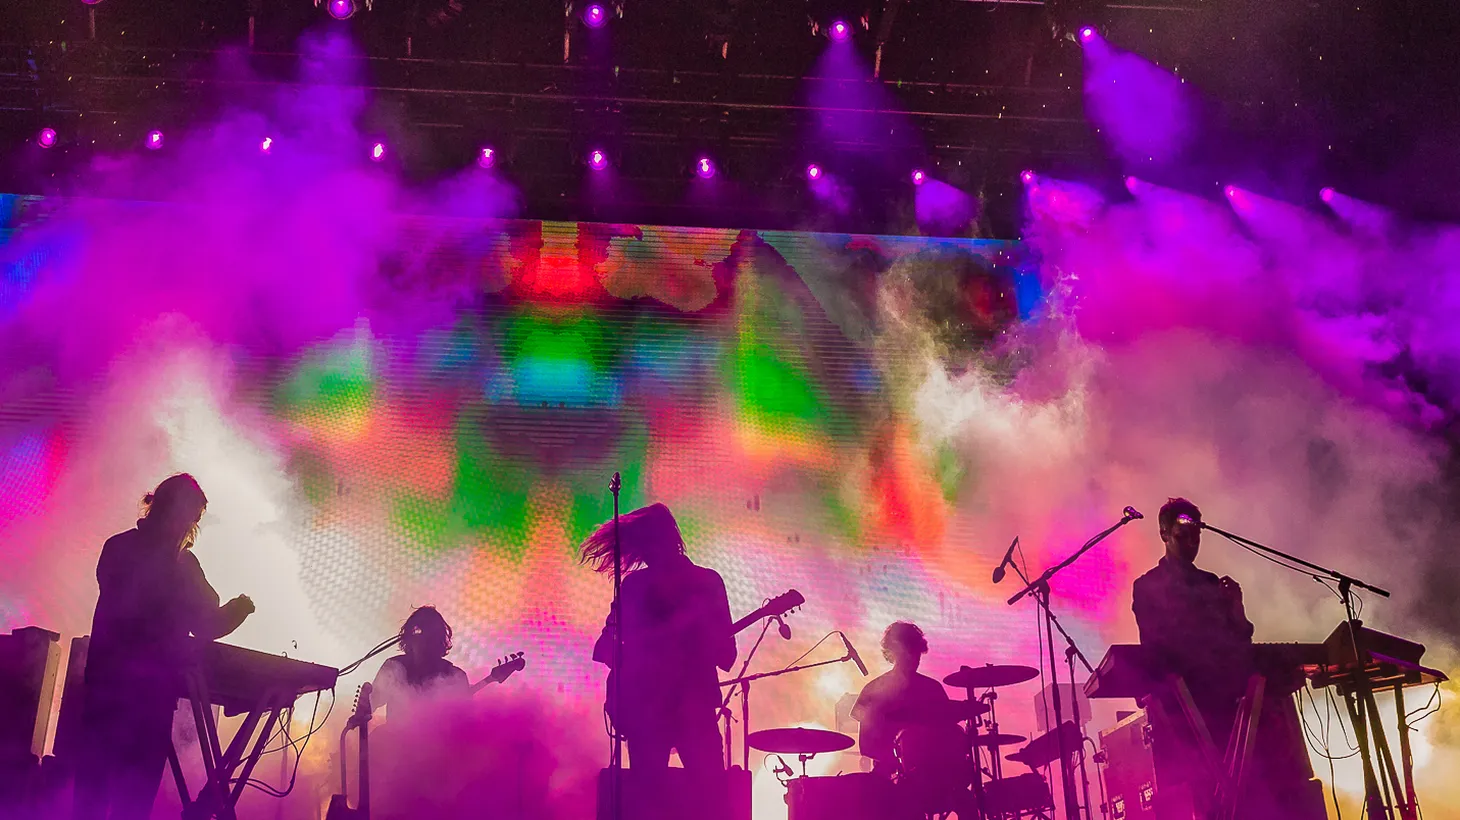 Tame Impala is set to perform their album “Lonerism” on its tenth anniversary at Desert Daze 2022, which returns to the shores of Lake Perris Sept. 30 to Oct. 2.